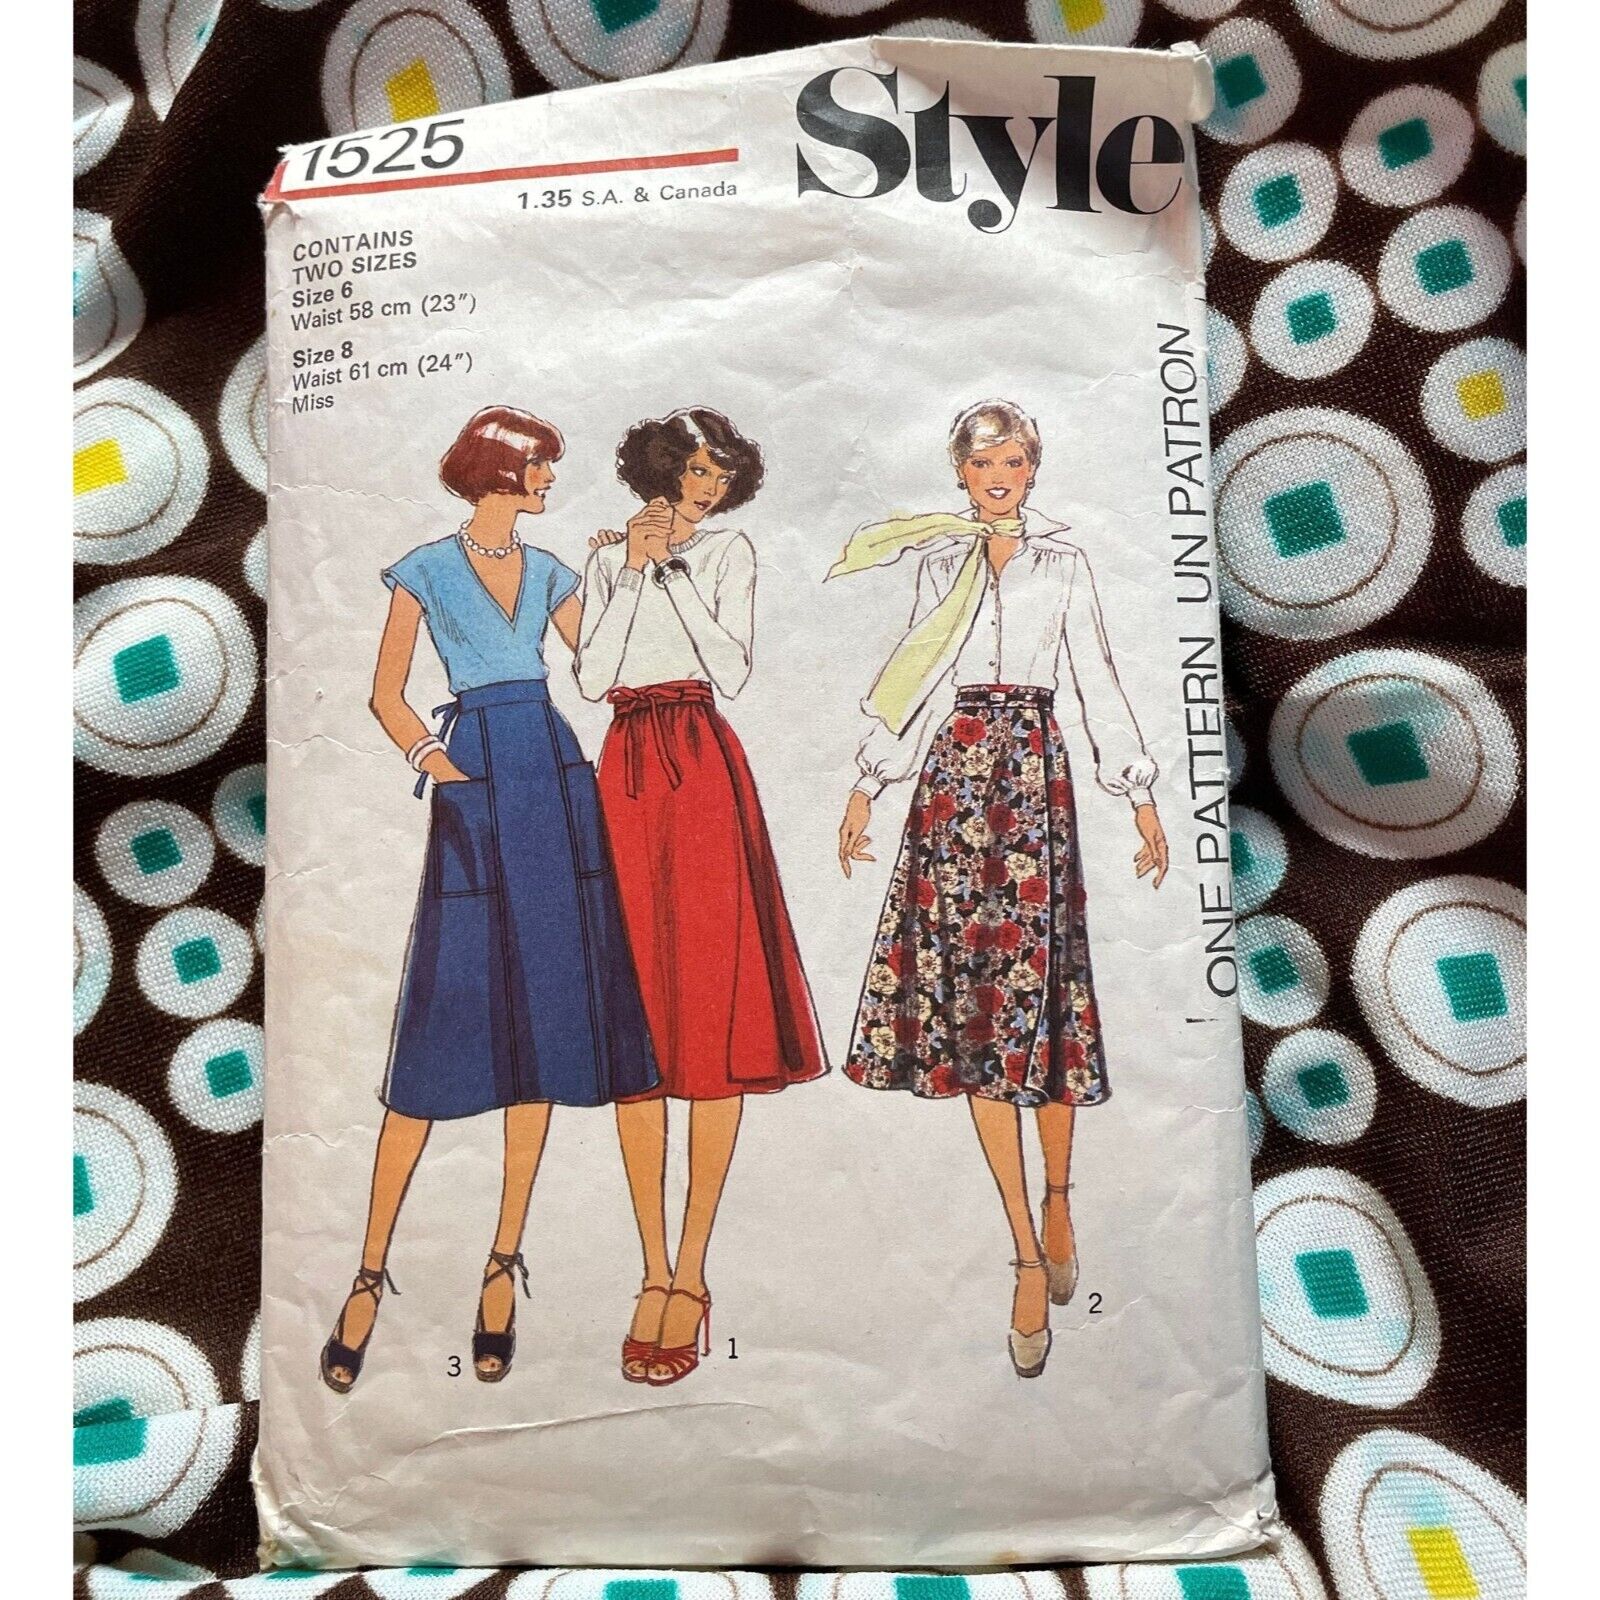 vintage 1976 sewing pattern, Style no 1525, wrap around skirt, size 6-8